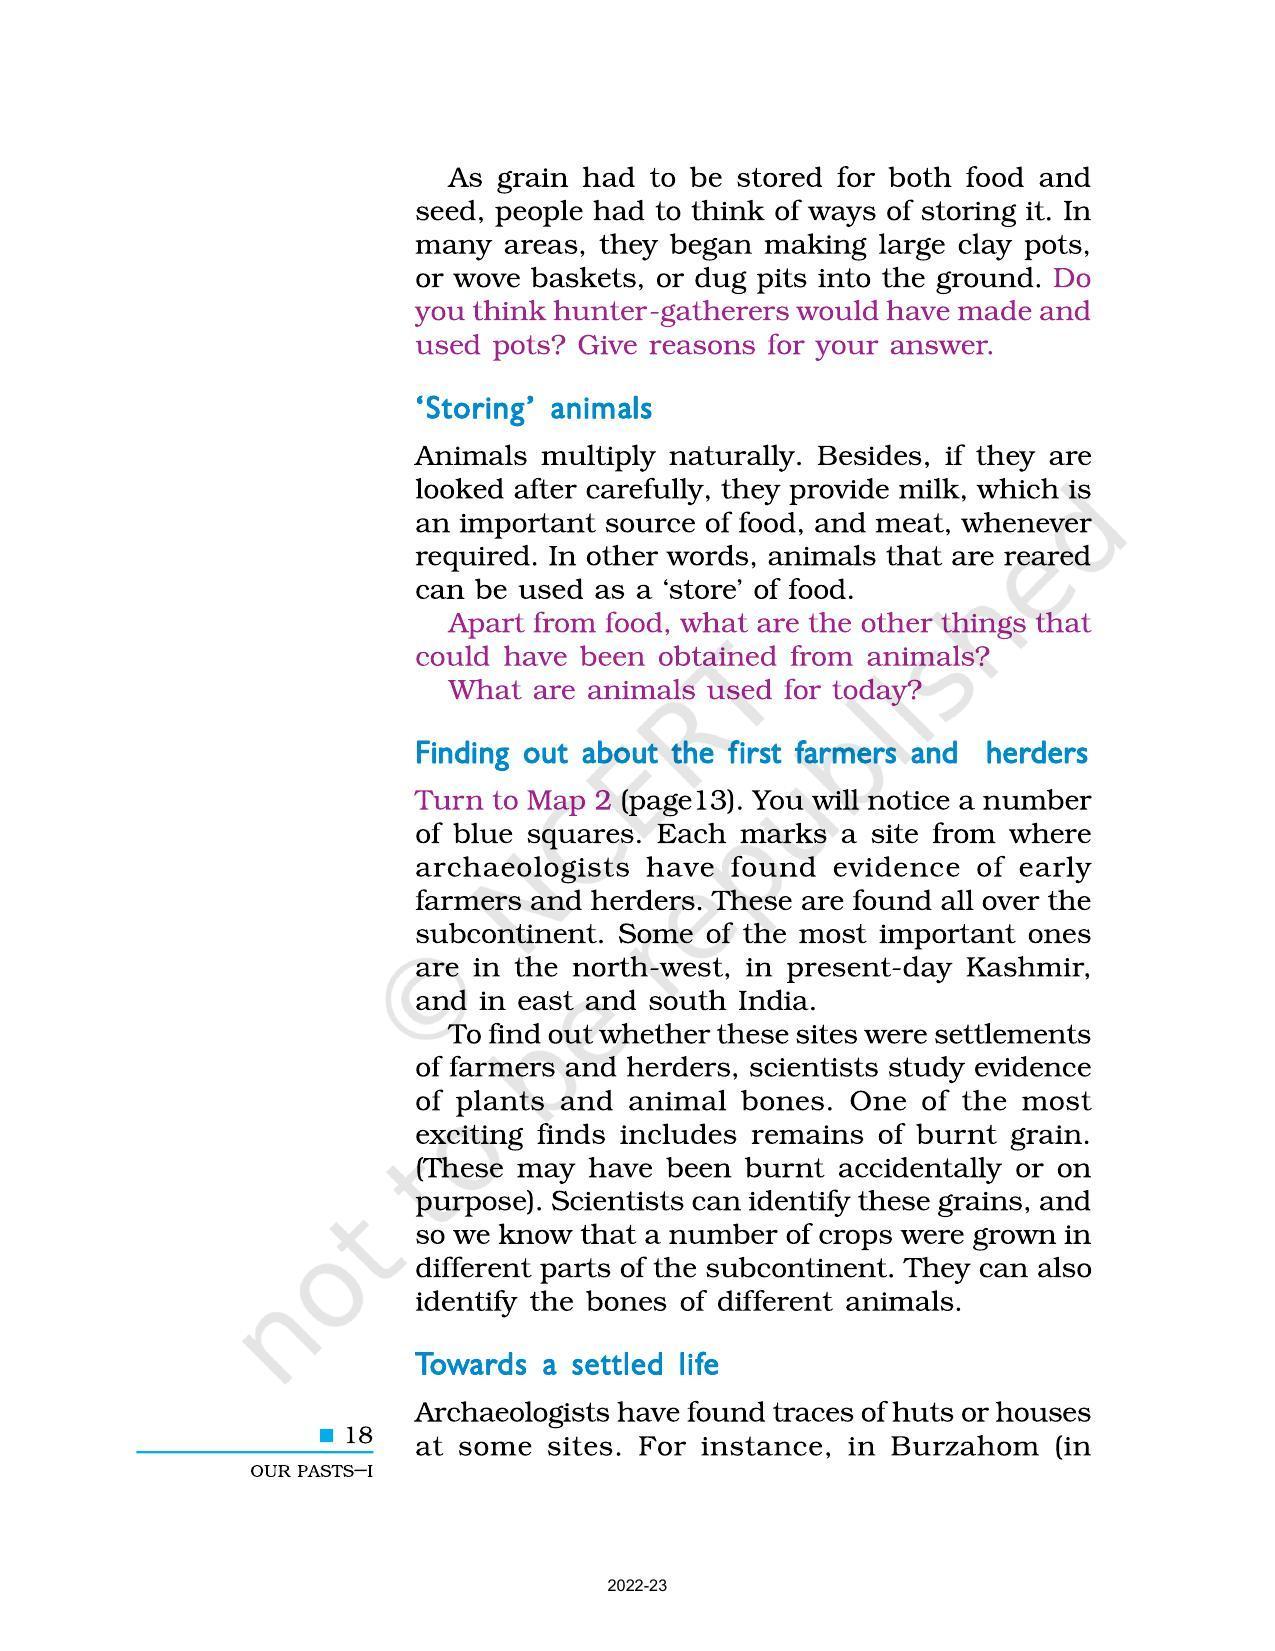 NCERT Book for Class 6 Social Science(History) : Chapter 2-On the Trail of the Earliest People - Page 8